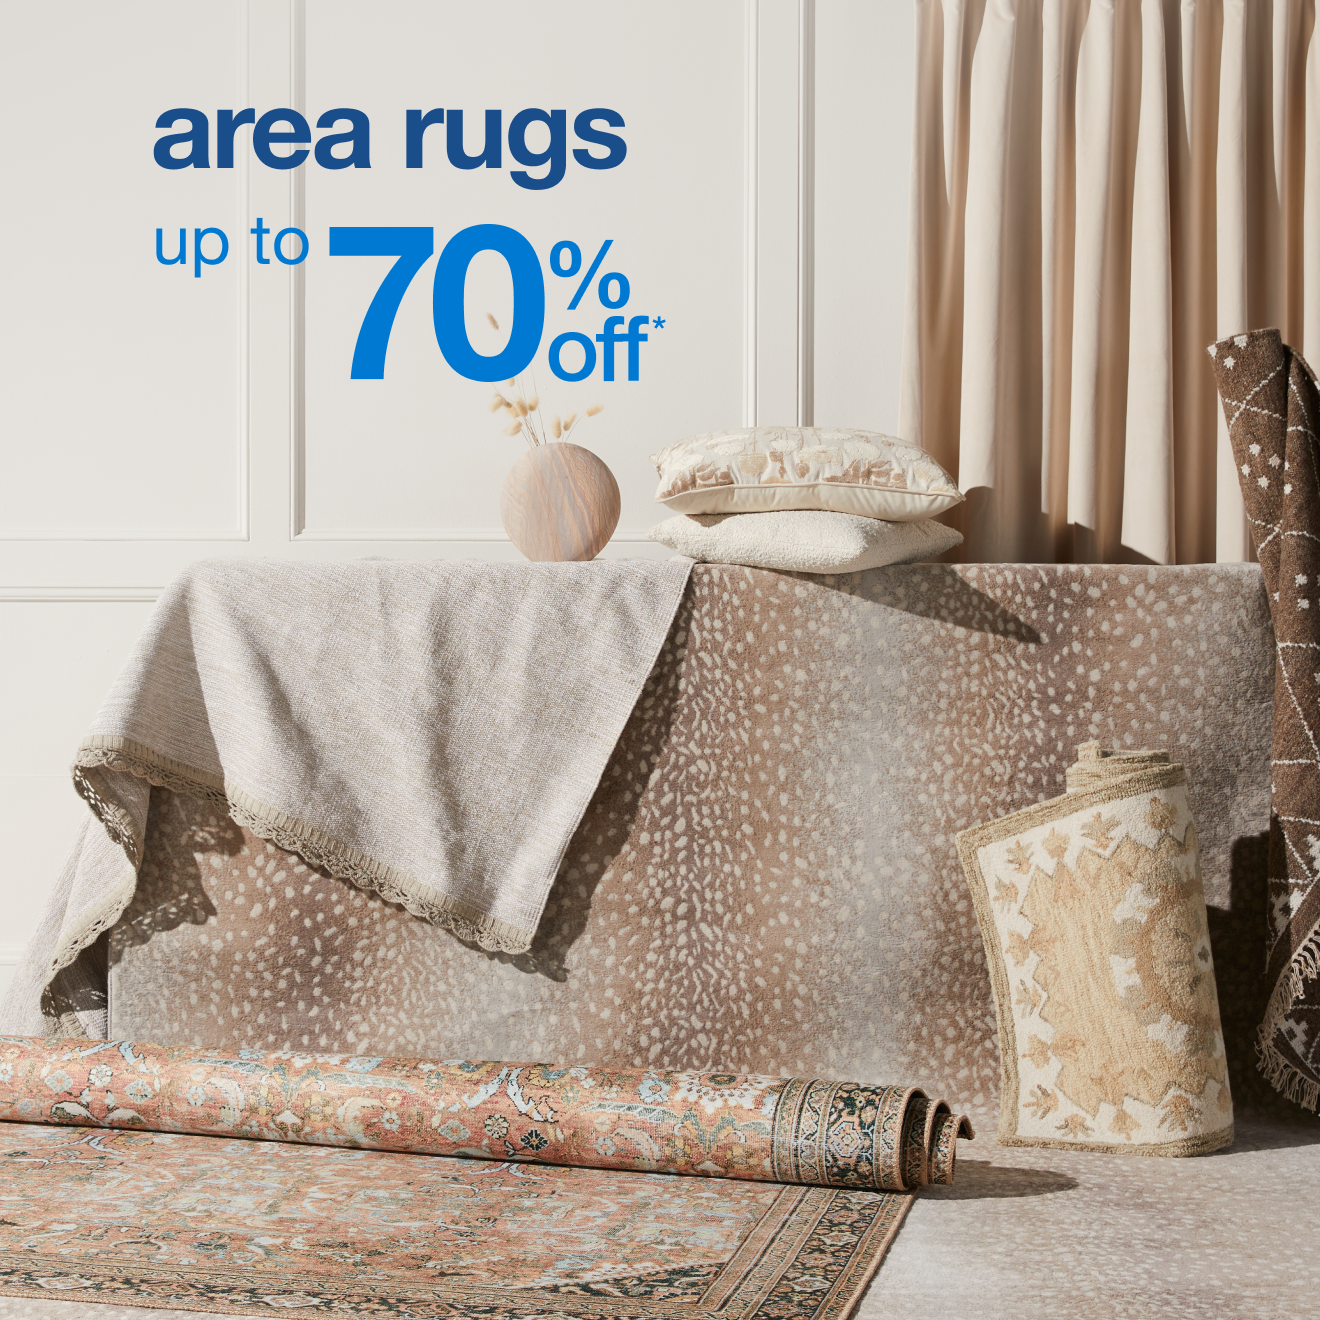 Roll out a new rug—Shop now!